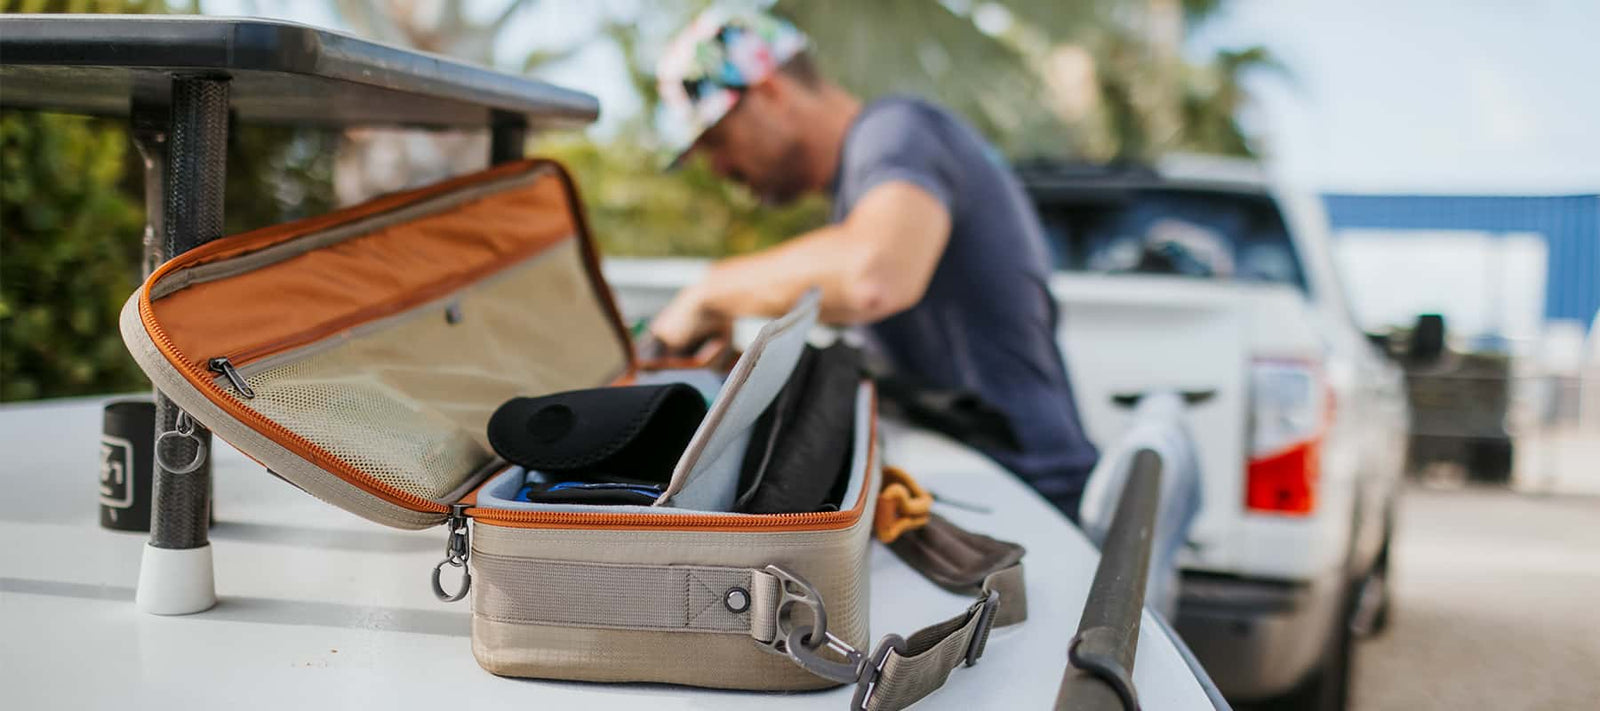 Fishpond Luggage & Fly Fishing Travel Gear - basin + bend